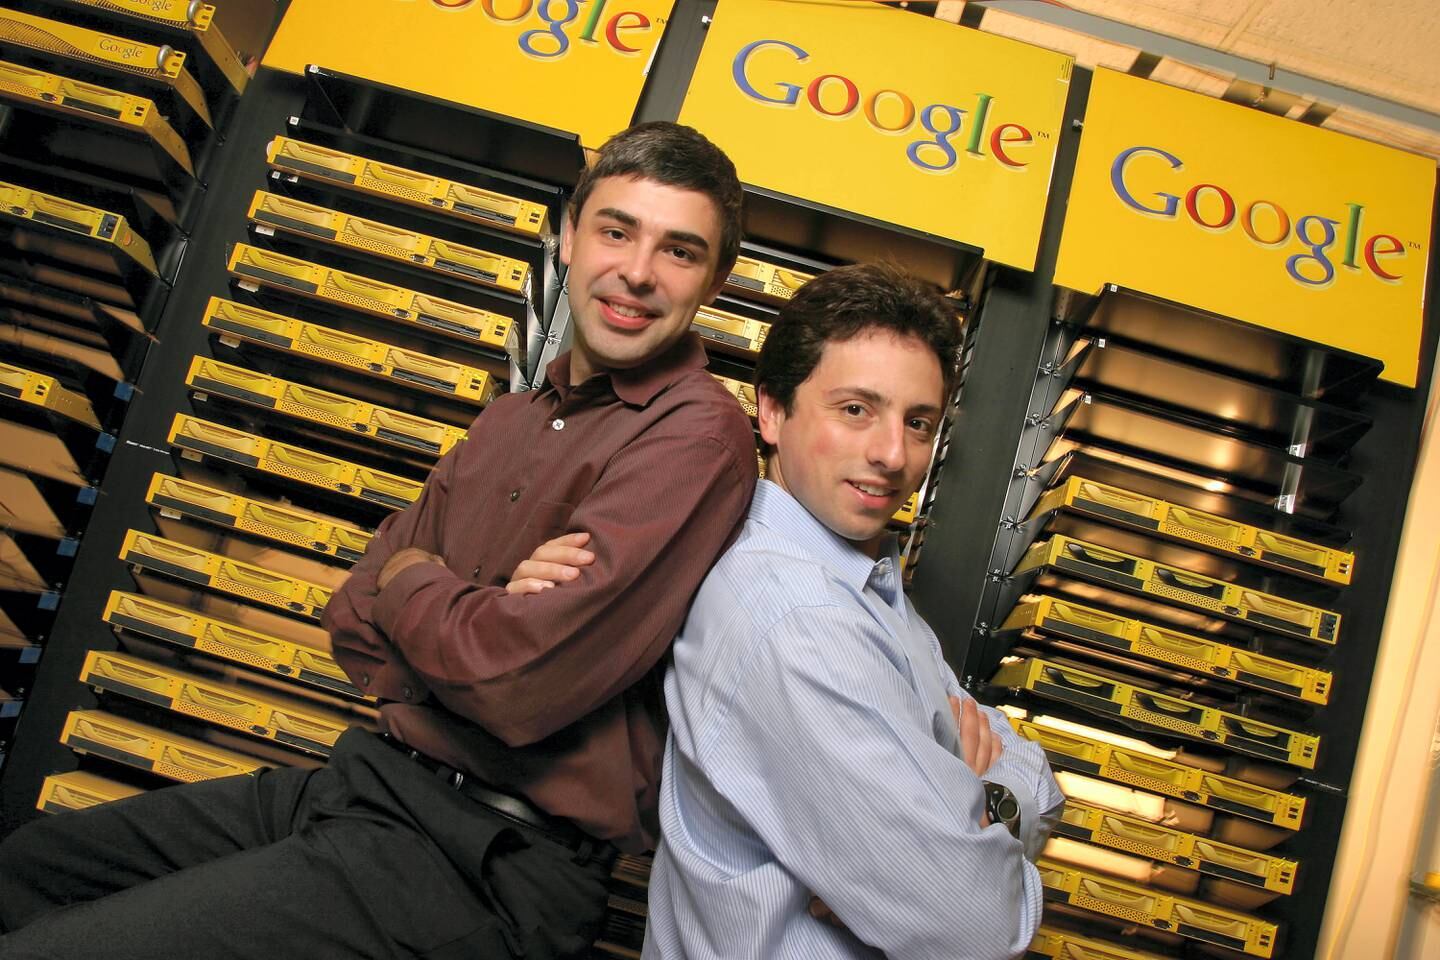 Larry Page (L), Co-Founder and President, Products and Sergey Brin, Co-Founder and President, Technology pose inside the server room at Google's campus headquarters in Mountain View. They founded the company in 1998. (Photo by Kim Kulish/Corbis via Getty Images)